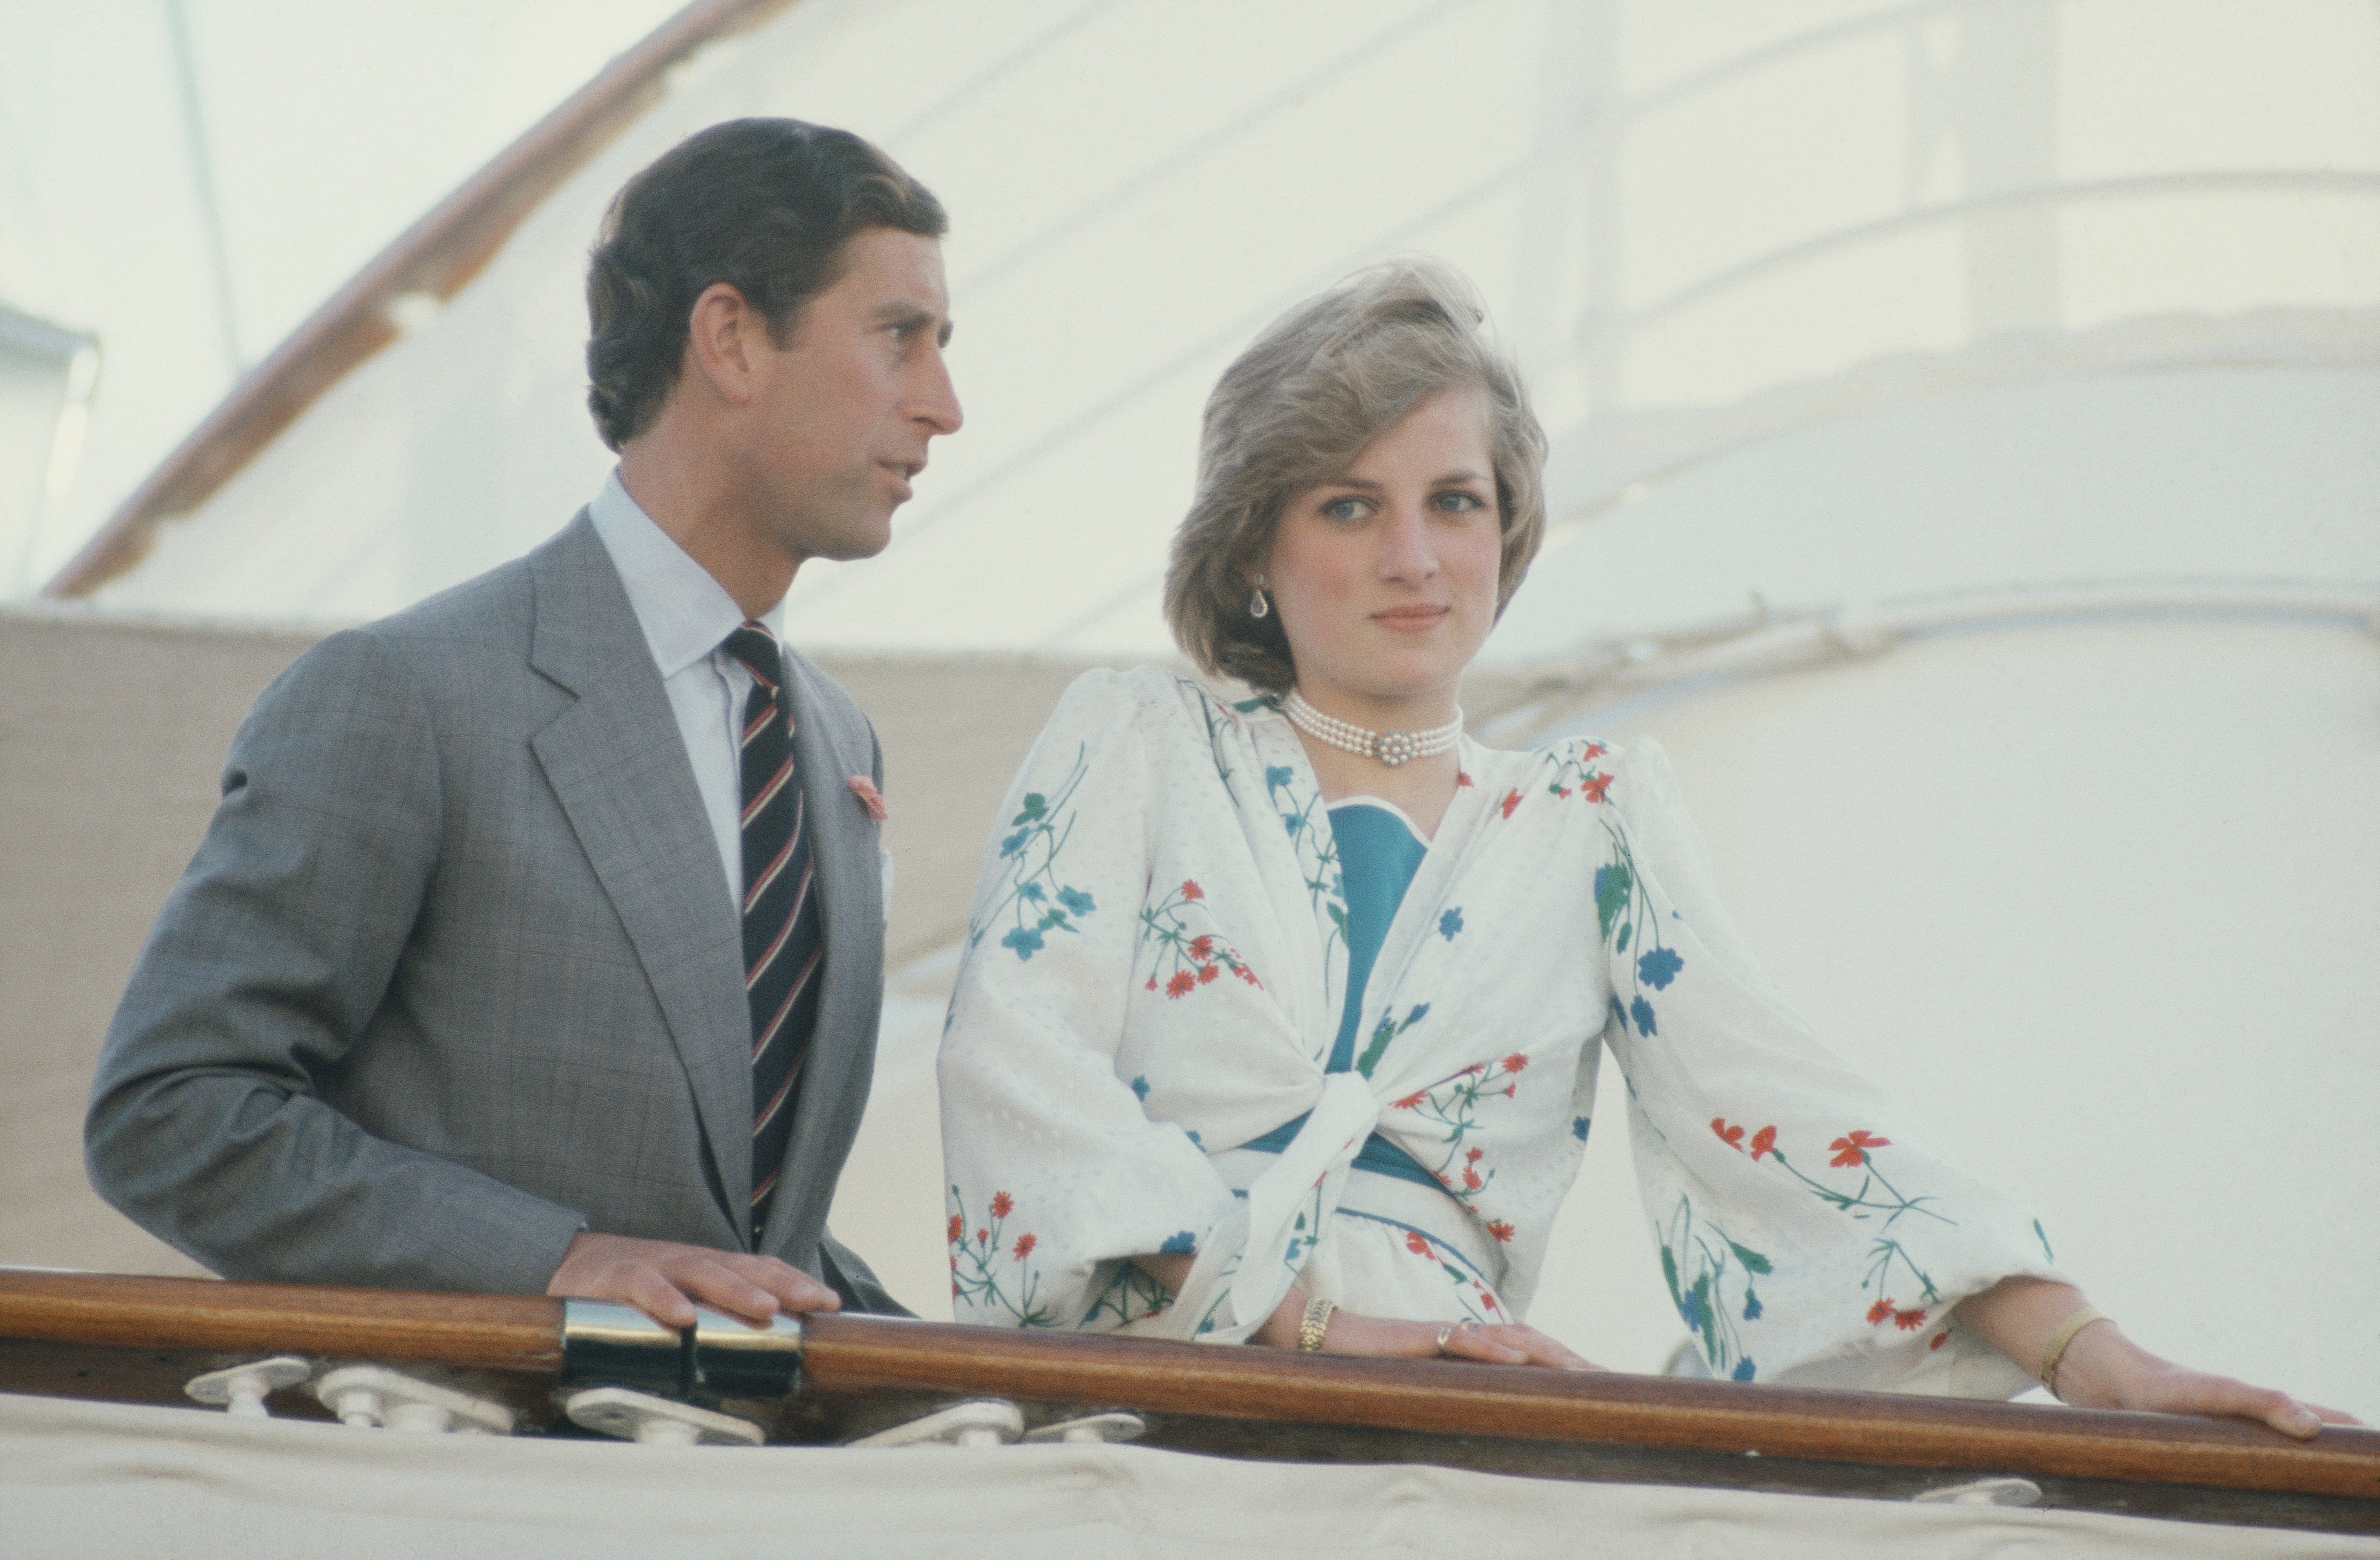 Prince Charles and Princess Diana board the Royal Yacht Britannia in Gibraltar at the start of their honeymoon cruise